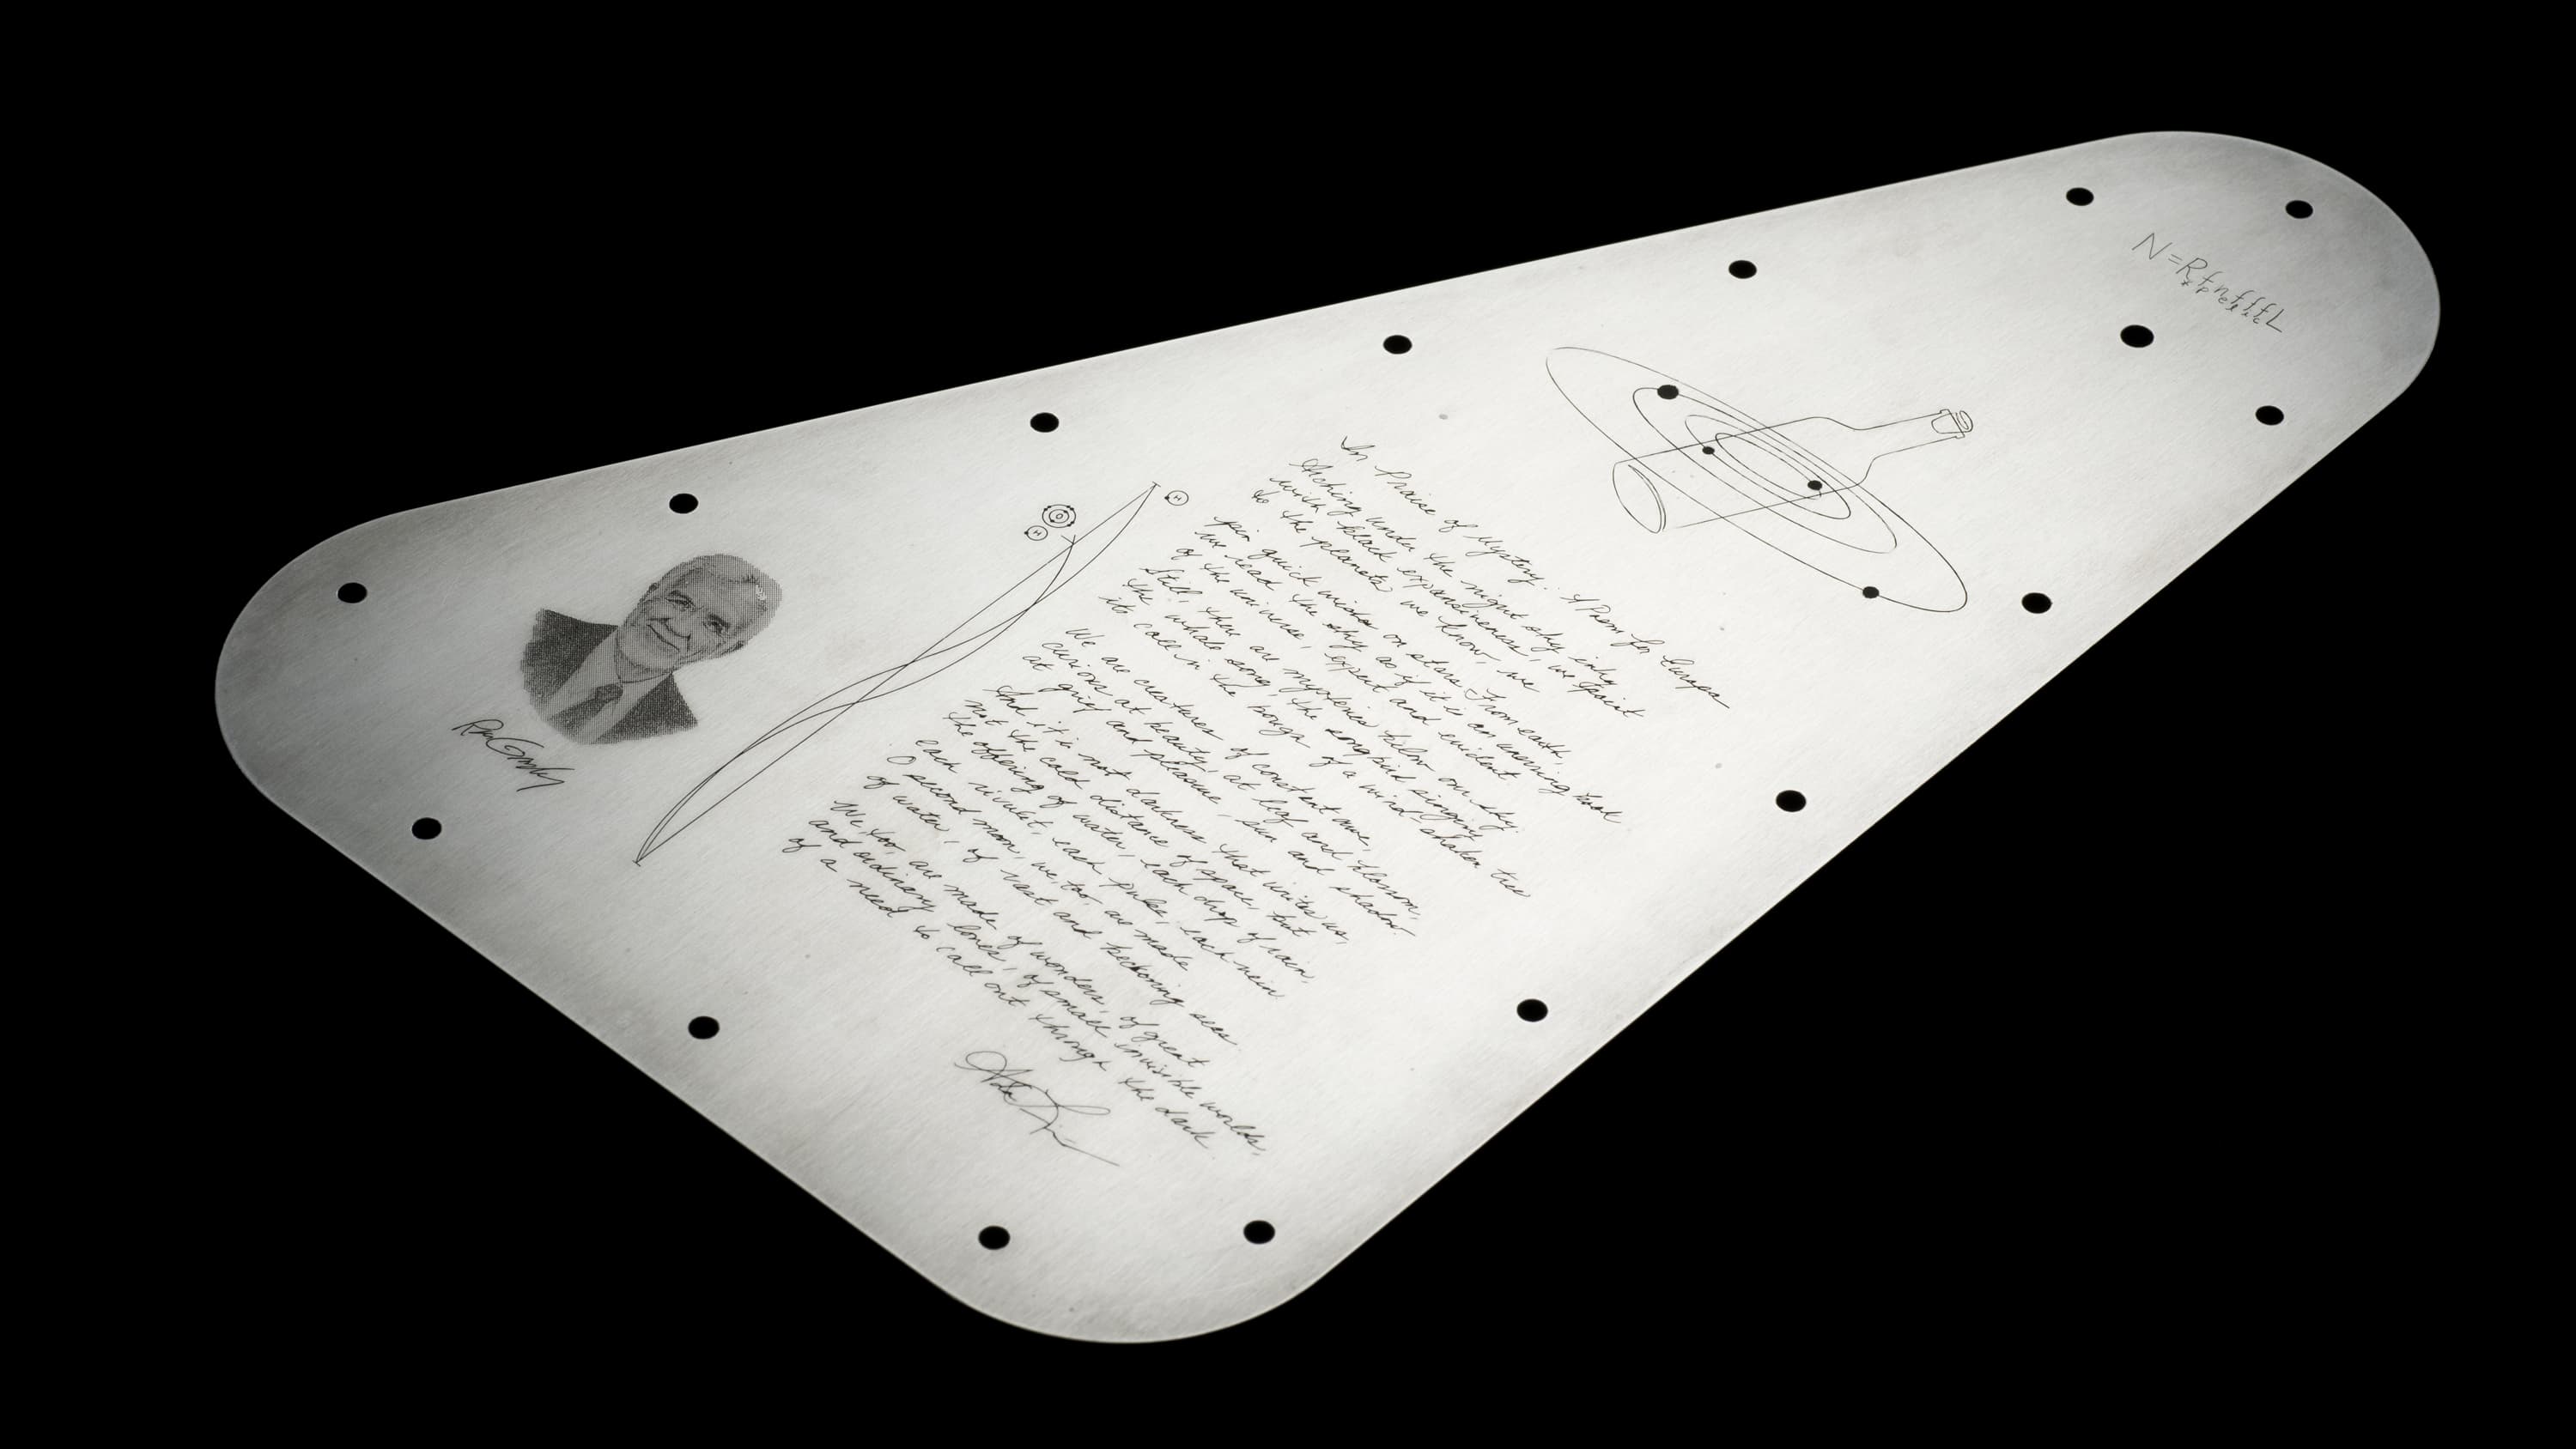 This side of the Europa Clipper's vault plate showcases a rich tapestry of scientific and cultural significance. At the top left, a detailed engraving of Frank Drake accompanies the Drake Equation in his own handwriting. Below, the graceful script of 'In Praise of Mystery: A Poem for Europa' by Ada Limón stretches across the plate. To the bottom left, a likeness of Ron Greeley pays homage to his contributions to planetary science. The 'Water Hole' radio emission lines are elegantly represented, symbolizing our search for extraterrestrial communication. This assembly of engravings on the reflective silver surface, set against the darkness, encapsulates humanity's quest for understanding beyond our world.